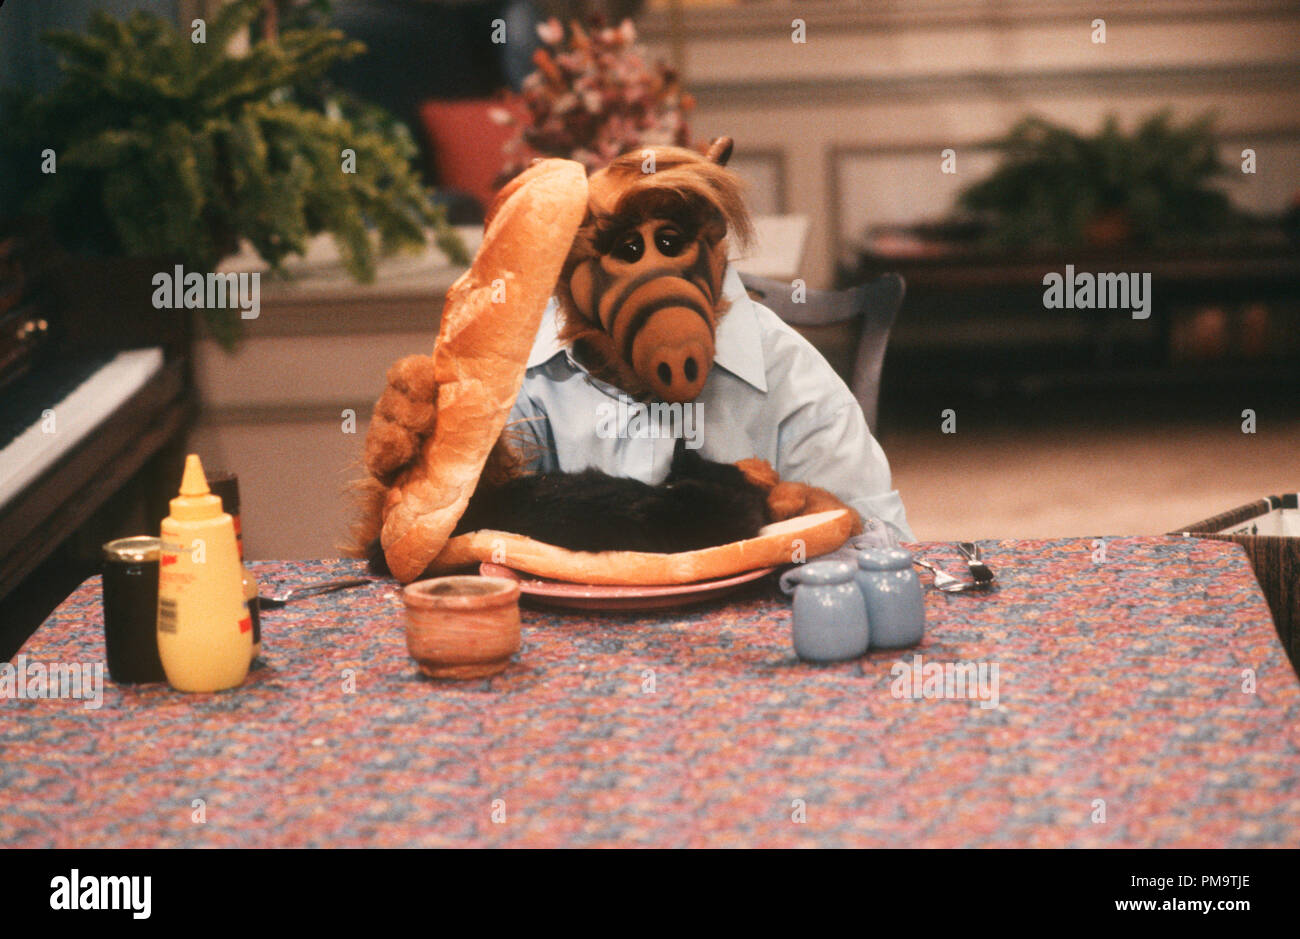 Studio Publicity Still from 'Alf' circa 1988  All Rights Reserved   File Reference # 31694376THA  For Editorial Use Only Stock Photo